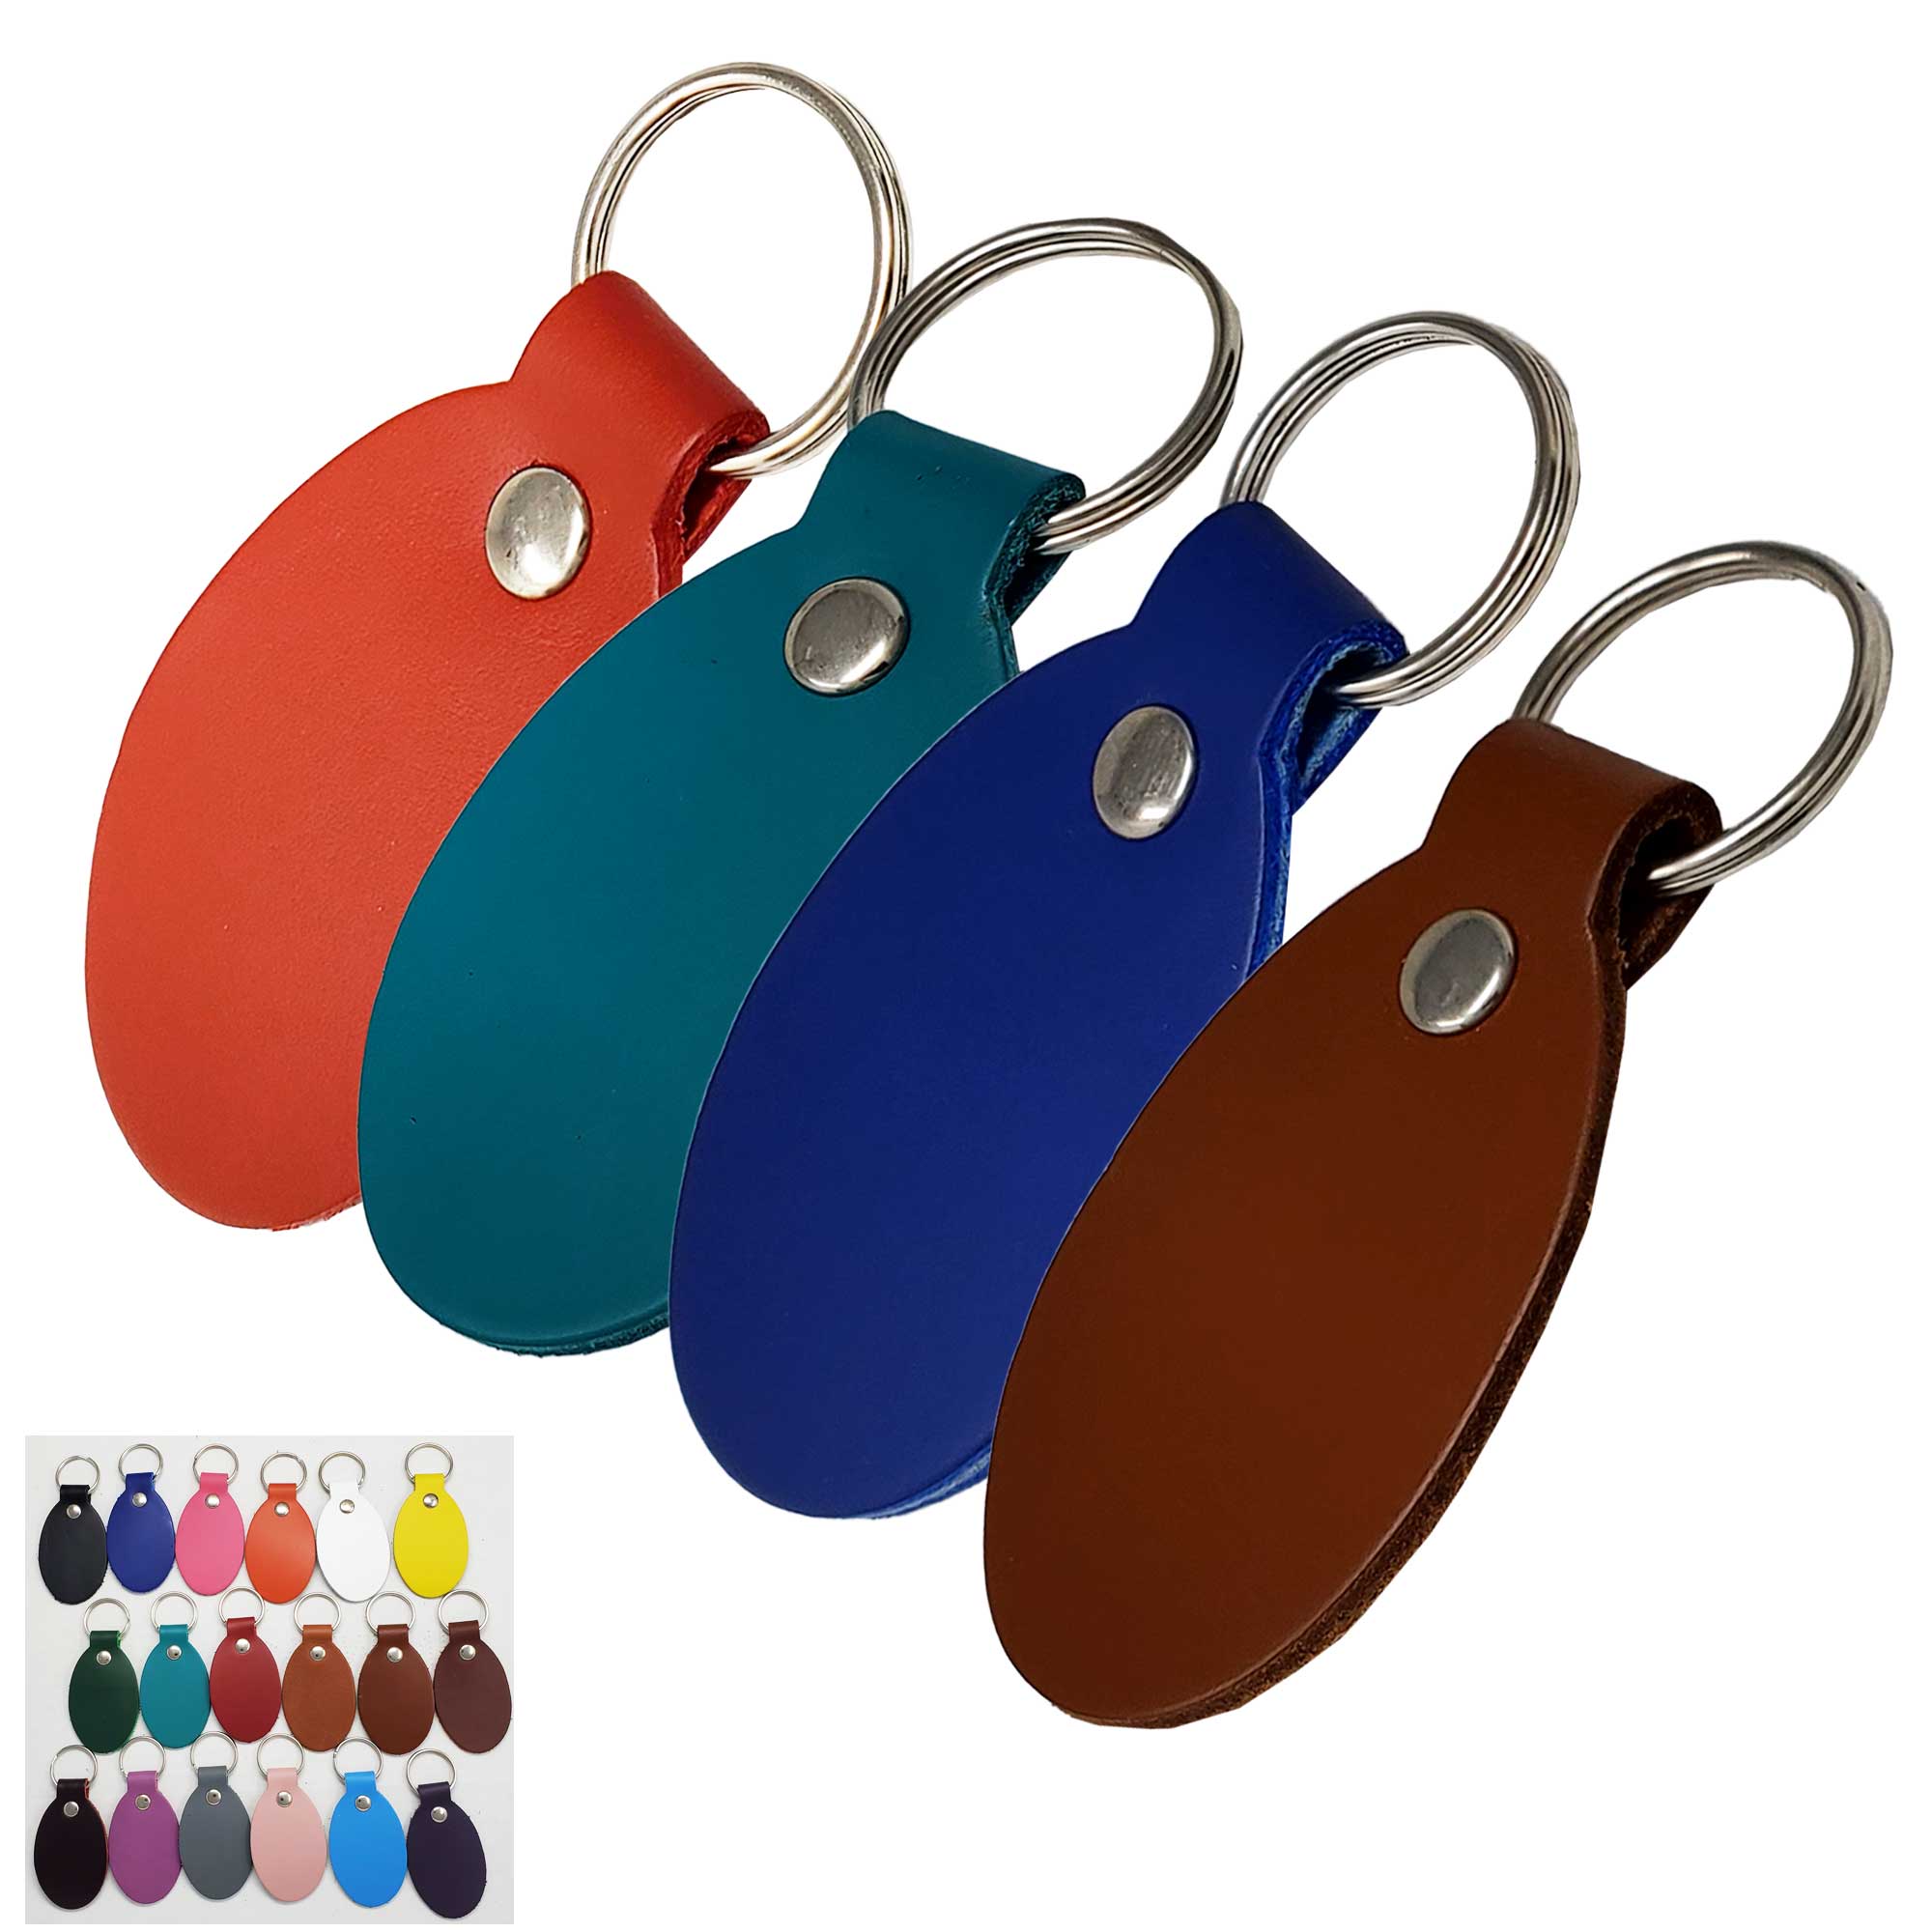 10 Pack Leather Keychains - Tooling/Engraving Ready Natural Blank KeyFobs